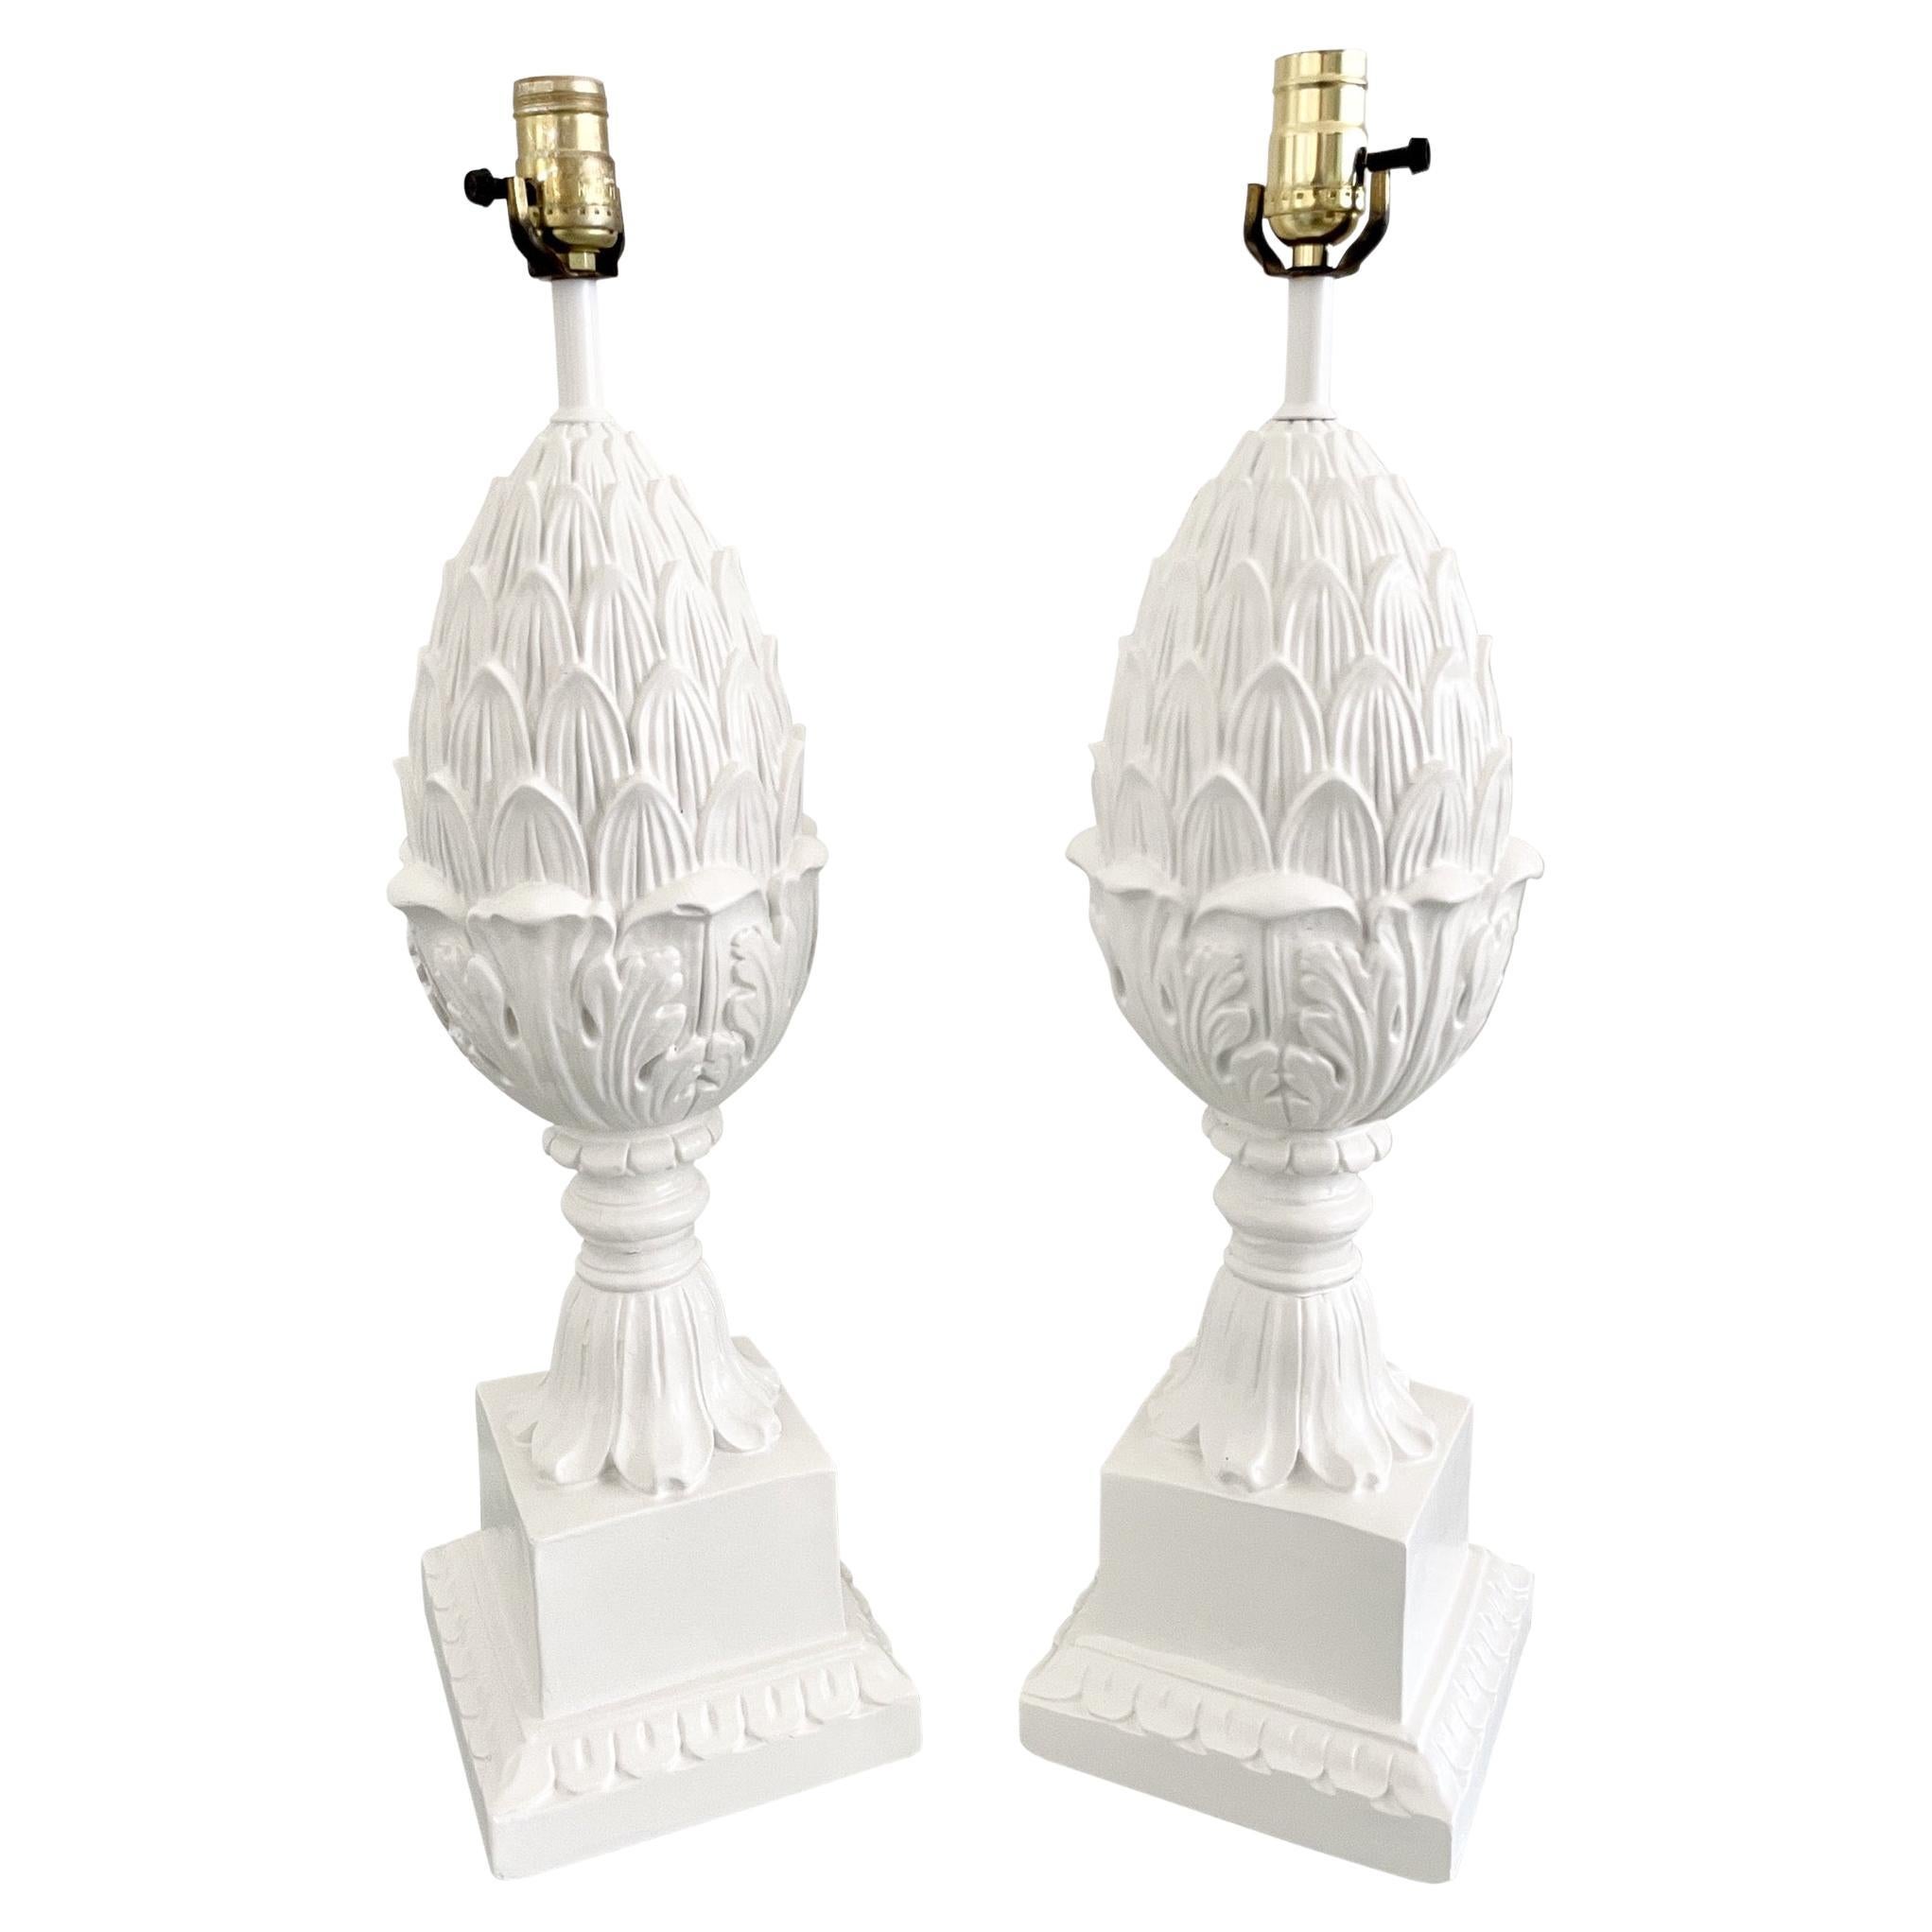 Boho Chic Pineapple Table Lamps, a Pair